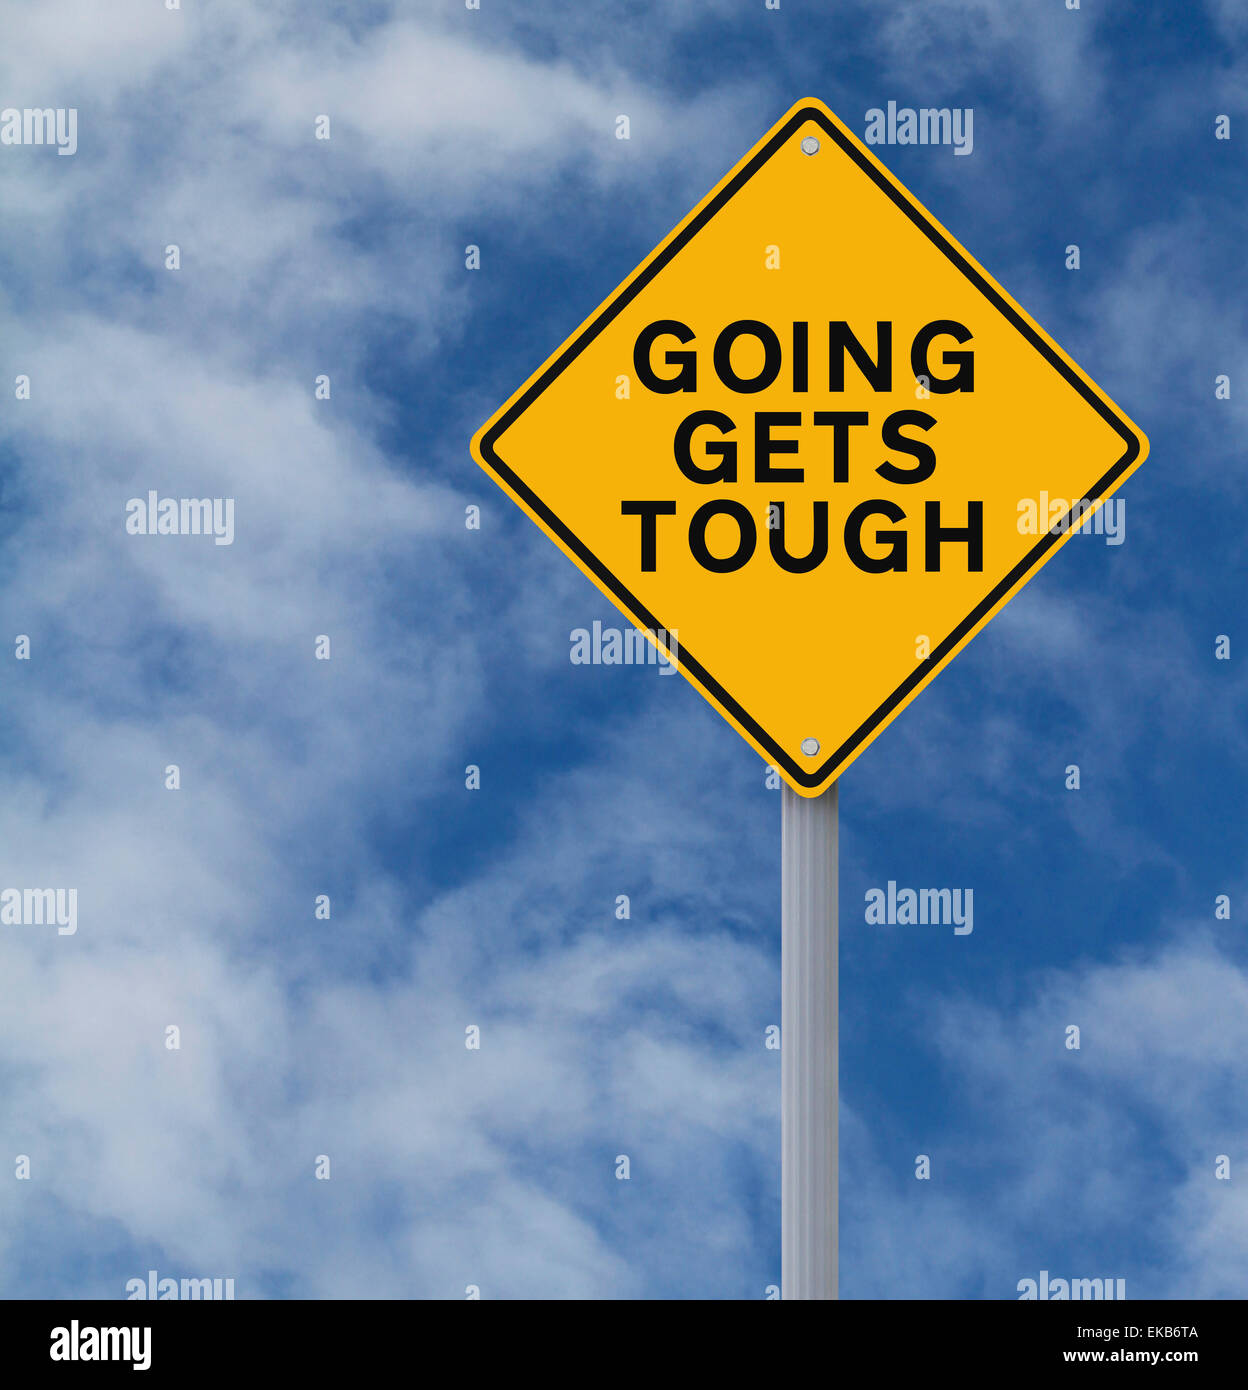 Going Gets Tough Stock Photo